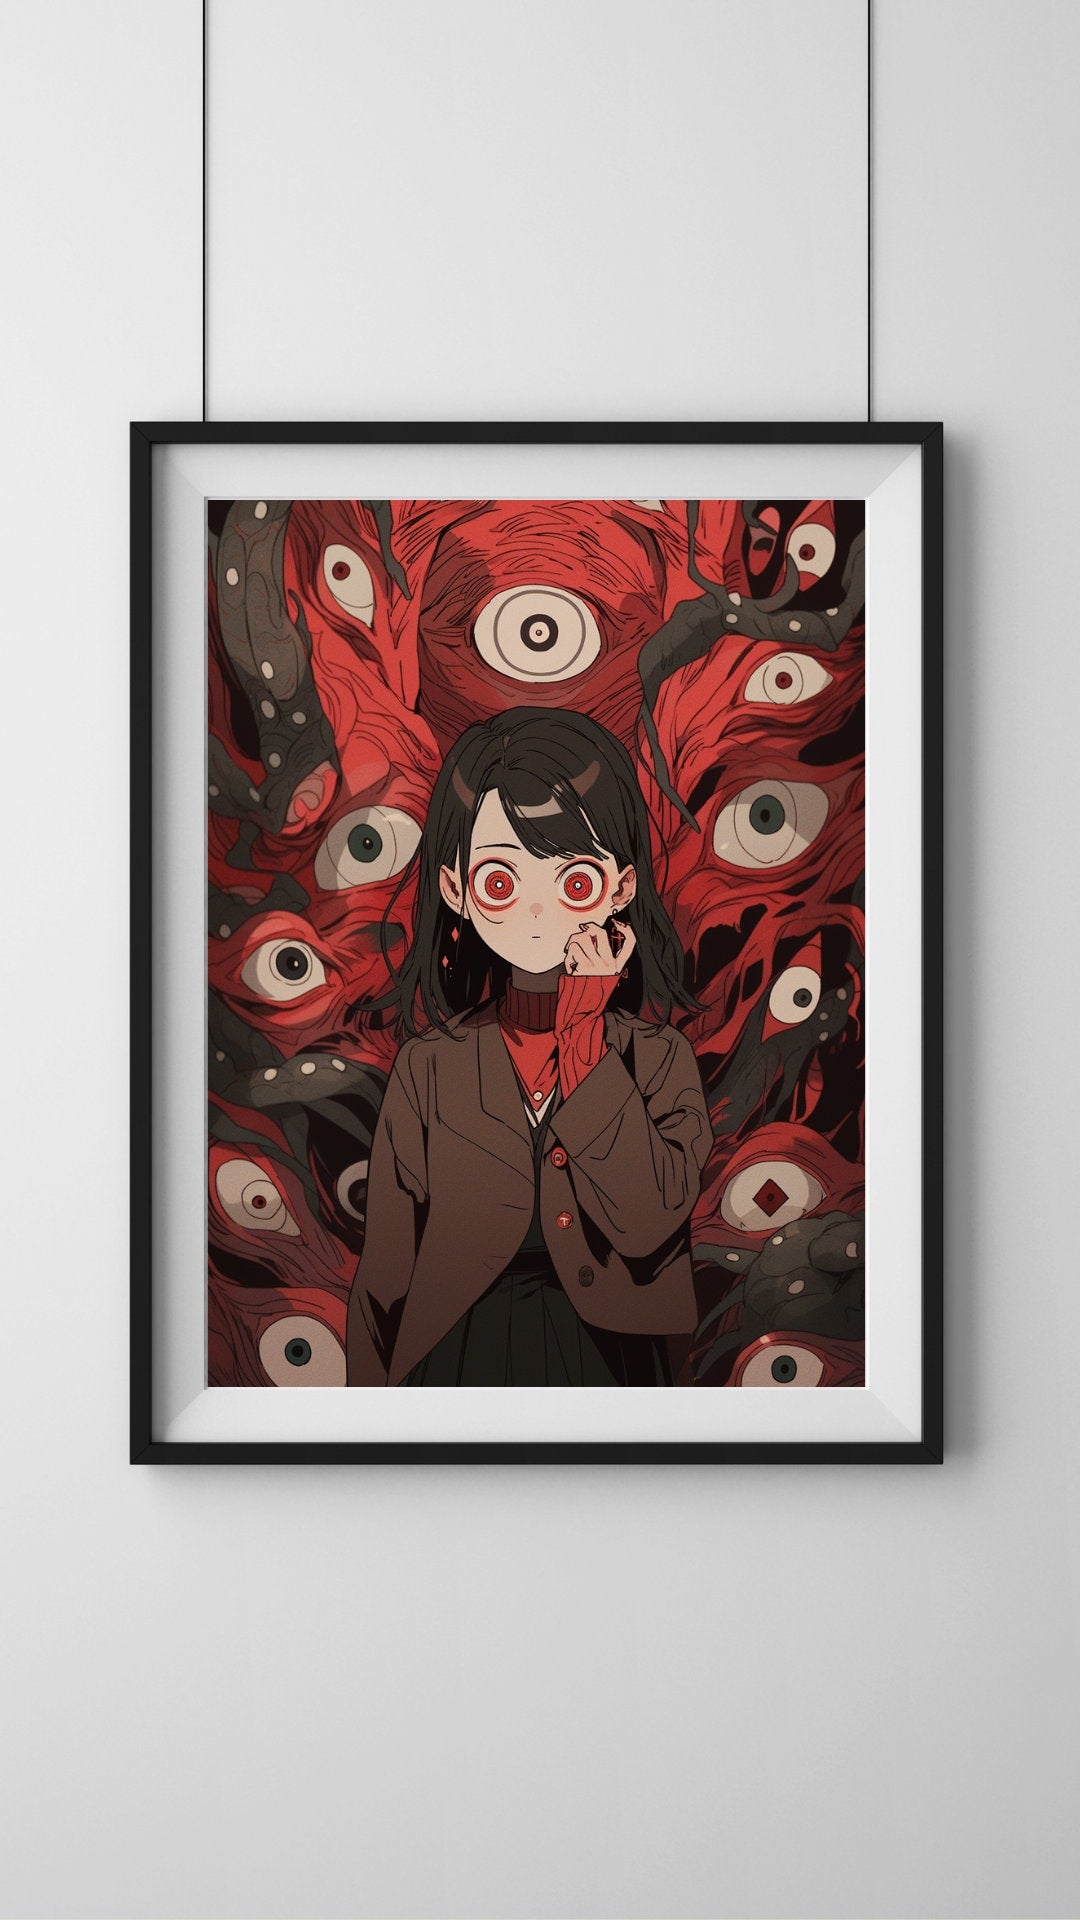 Gaze of the Abyss - Haunting Anime Girl and Watchful Eyes Art Print